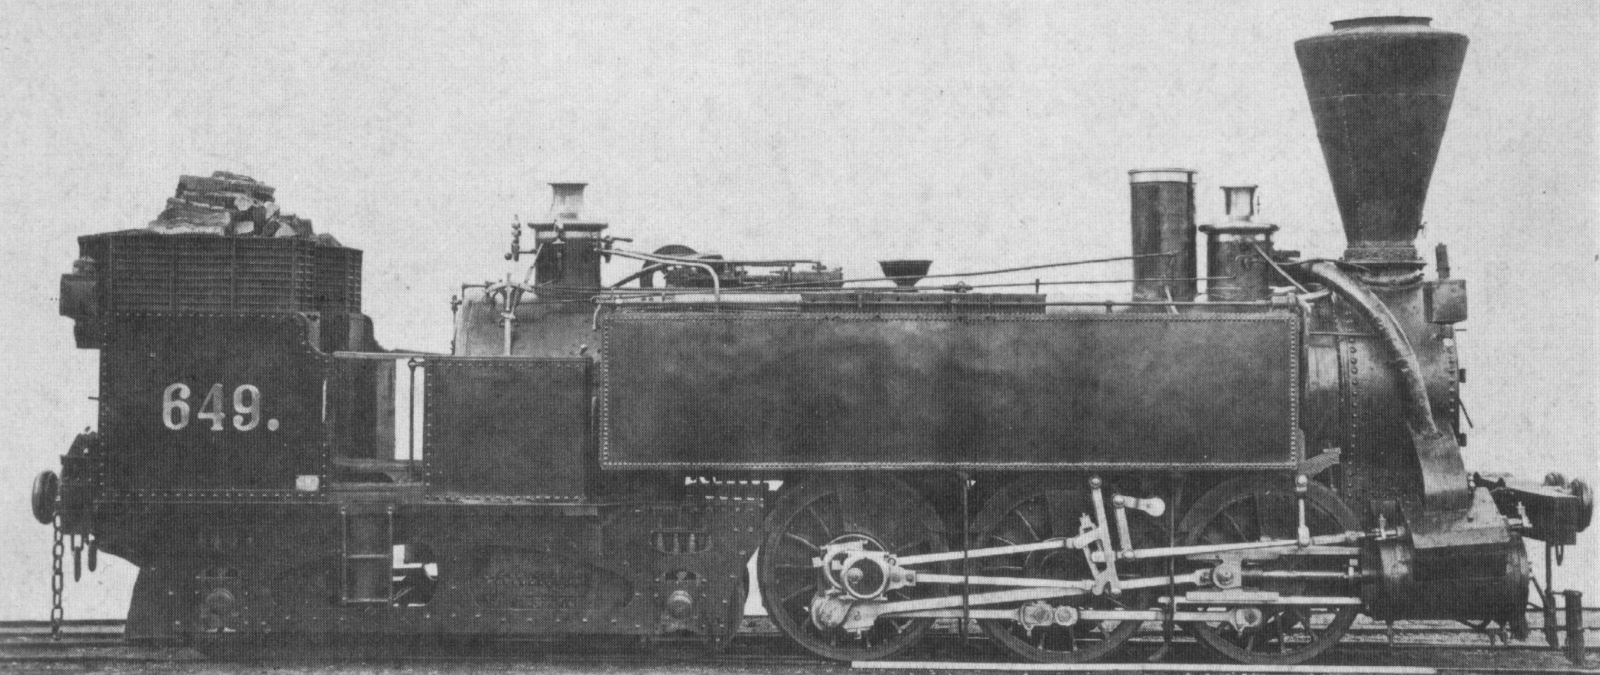 No. 649 of the Southern Railway Company